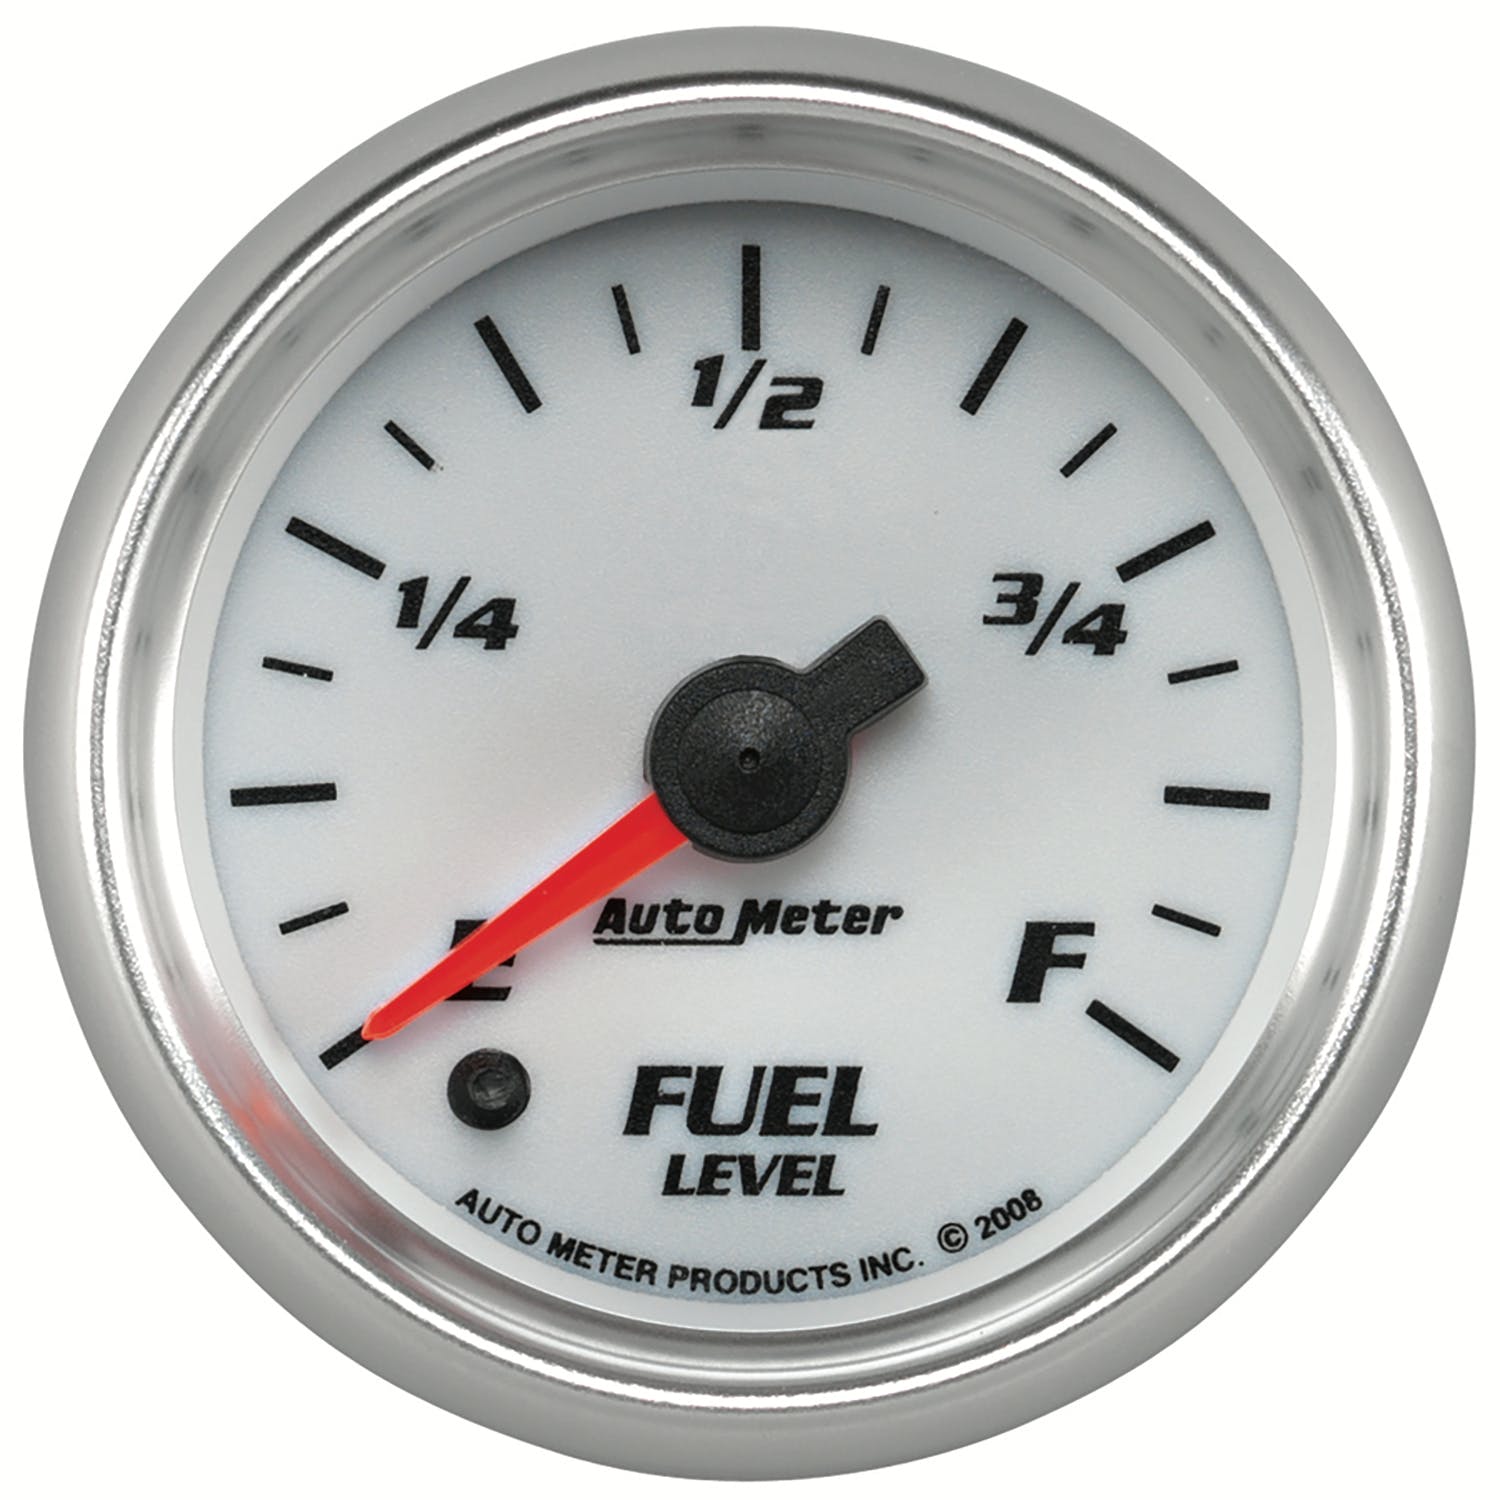 AutoMeter Products 19709 Pro-Cycle Programmable Fuel Level Gauge 2-1/16 in. 0-280OE White/Polished